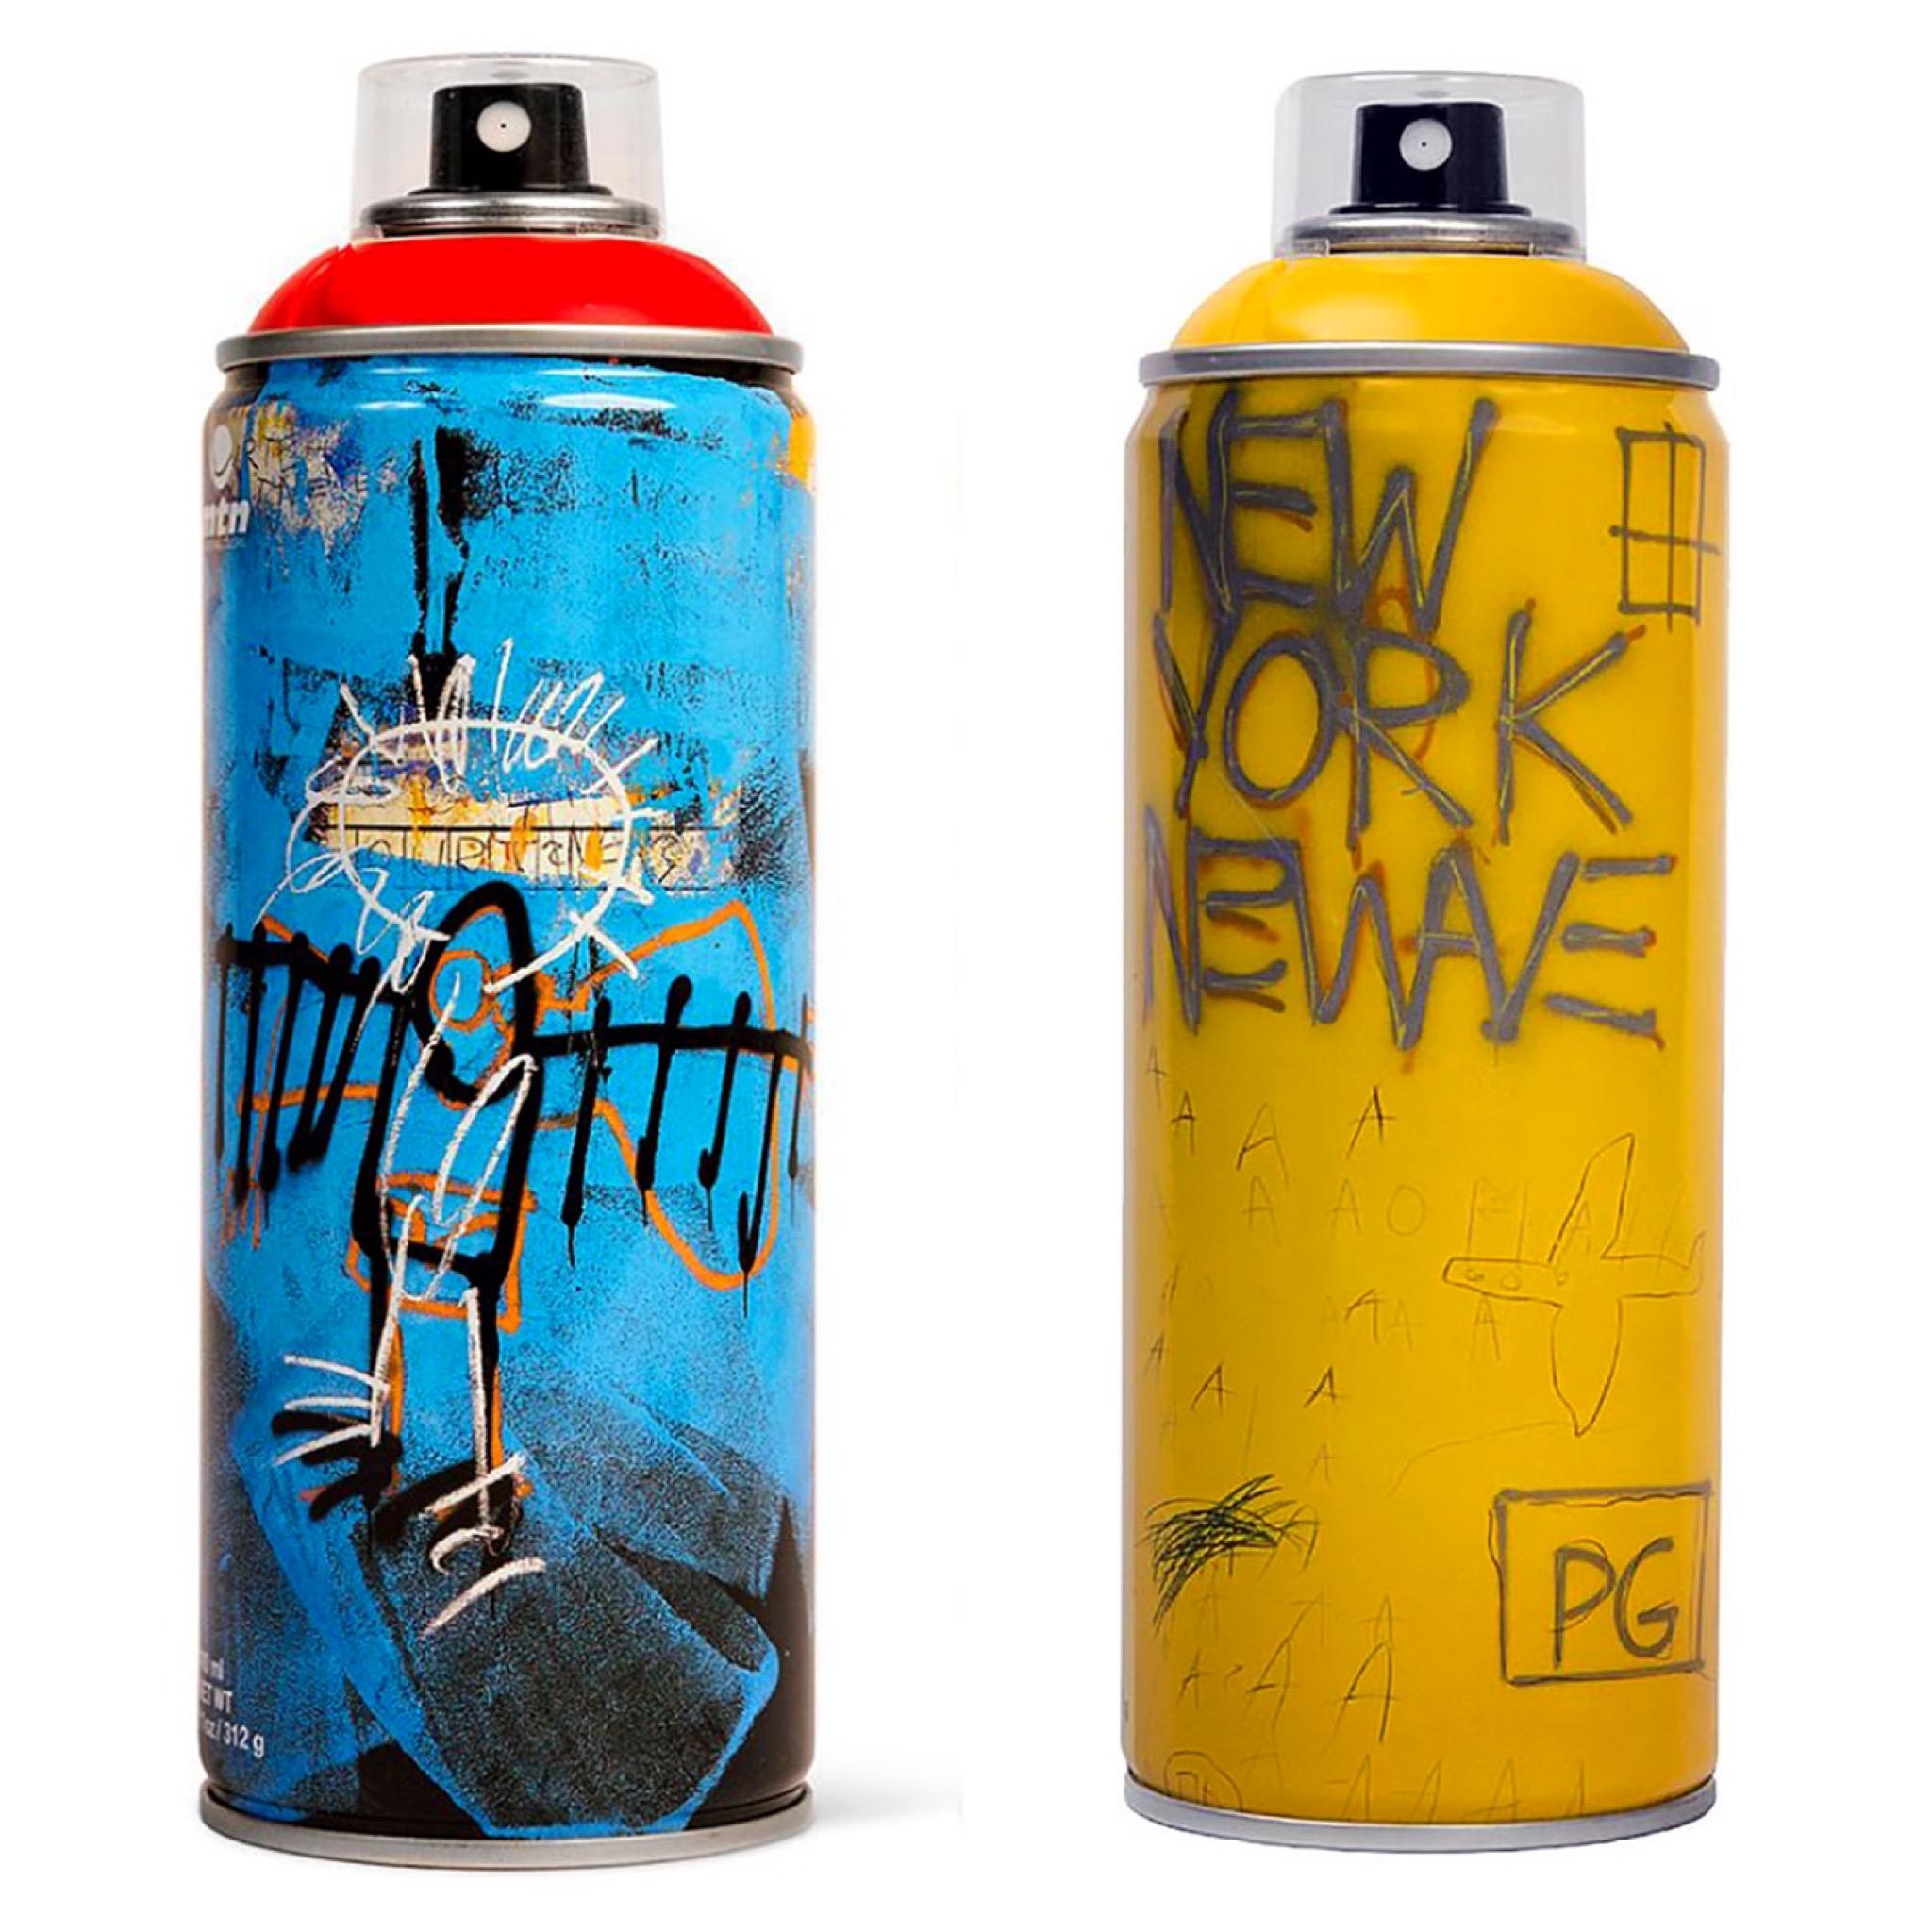 Limited edition Basquiat spray paint can (set of 2) - Mixed Media Art by after Jean-Michel Basquiat